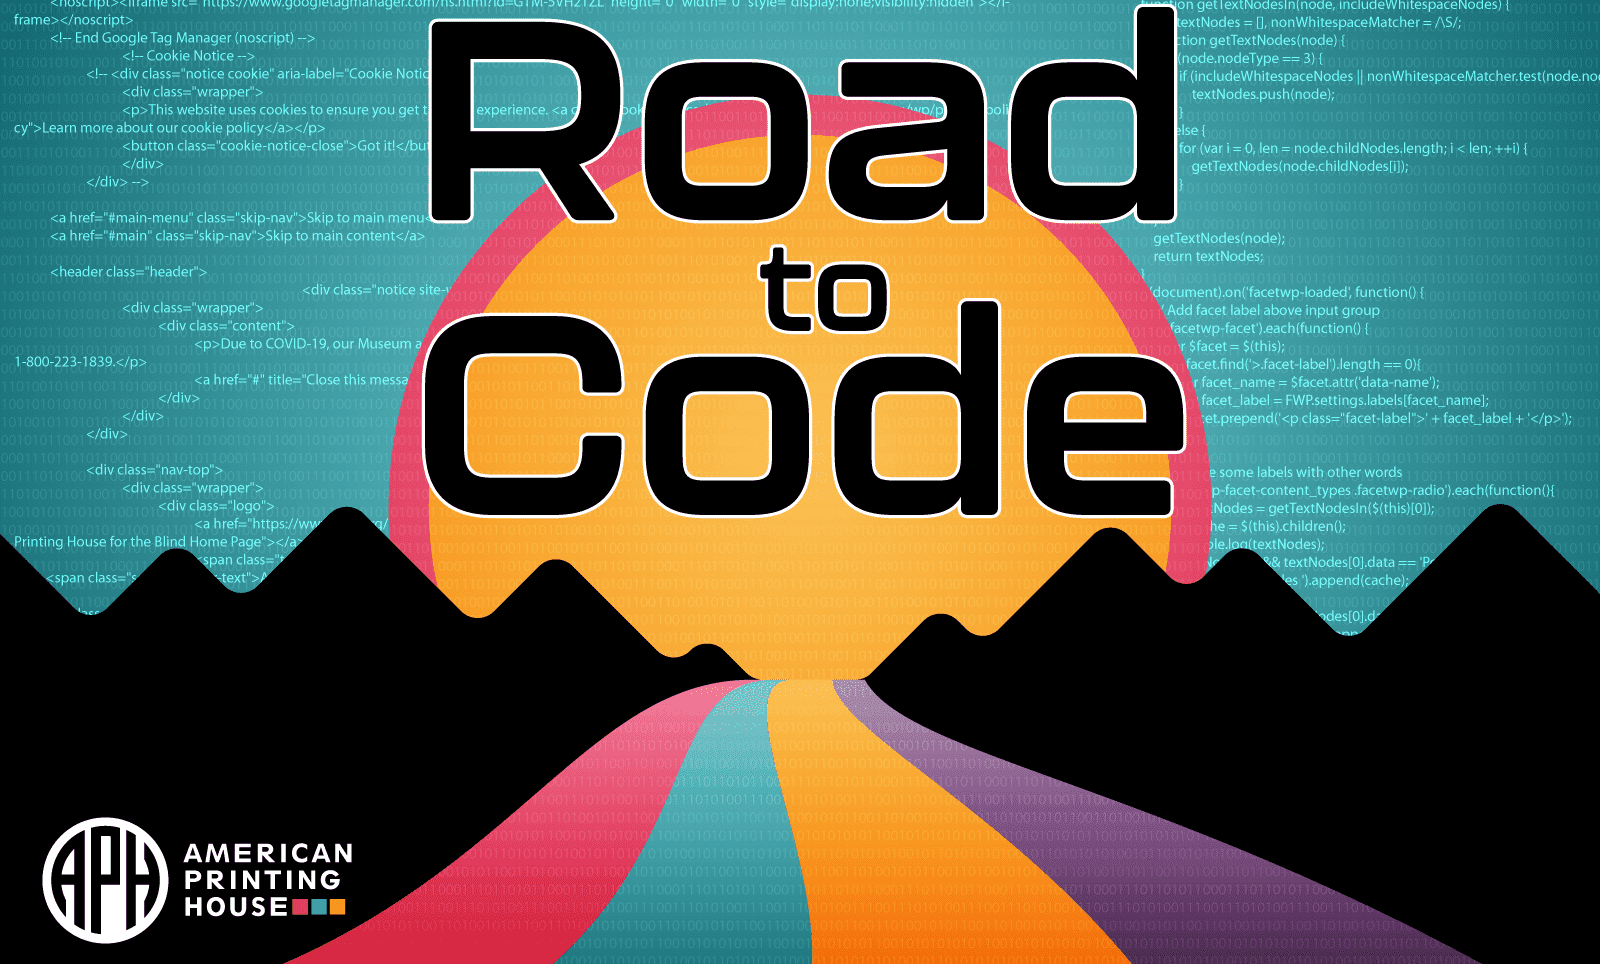 a graphic that says "Road to Code" showing a winding road in our branding colors toward a sunset and at the horizon. The sky giving a star effect made of coding symbols.